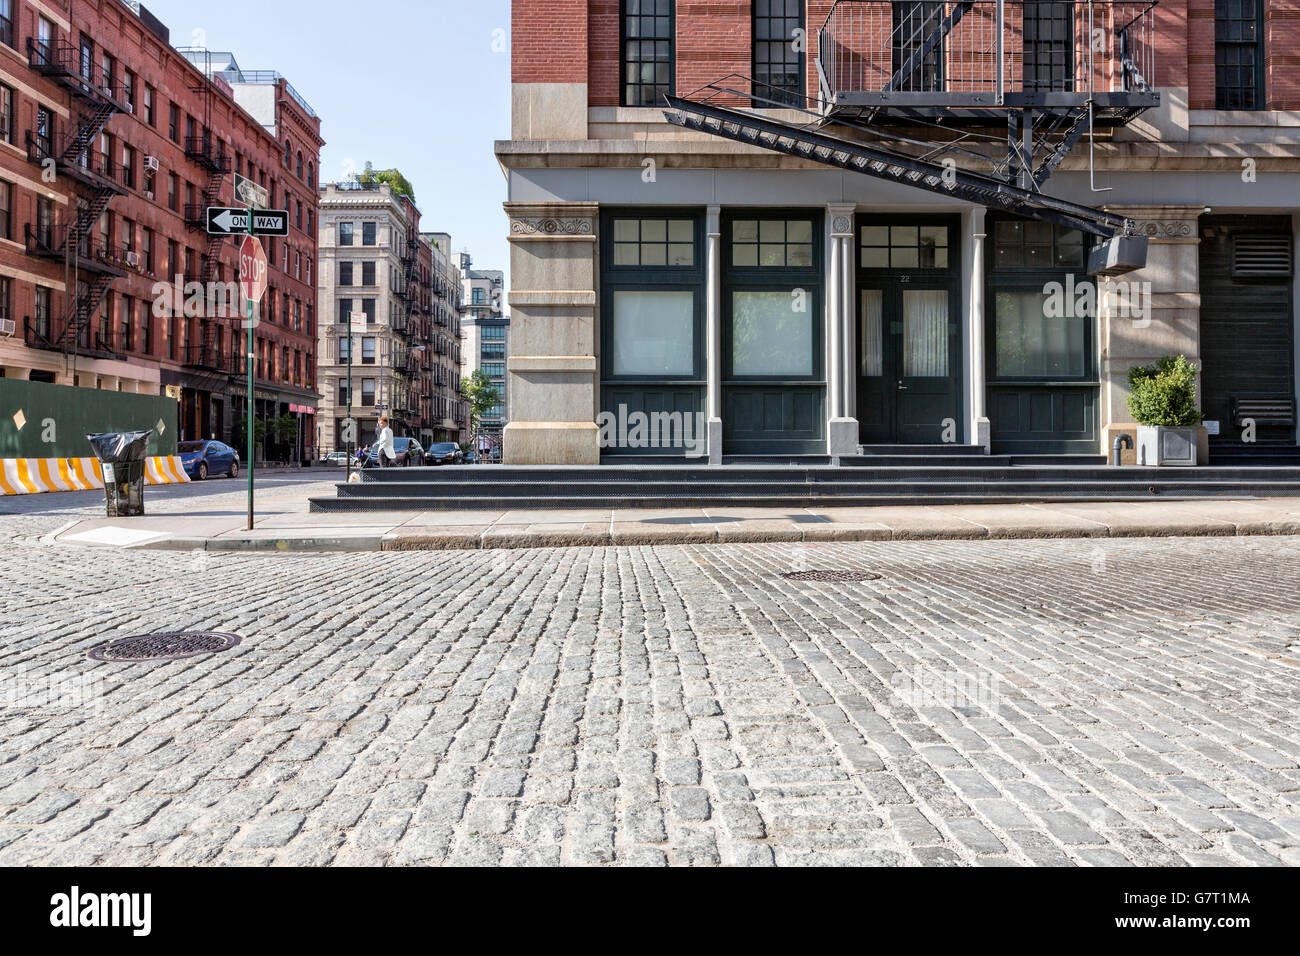 Tribeca, Manhattan, New York City.  Intersection of Watts and Greenwich Streets on a Bright, Sunny Day. Stock Photo